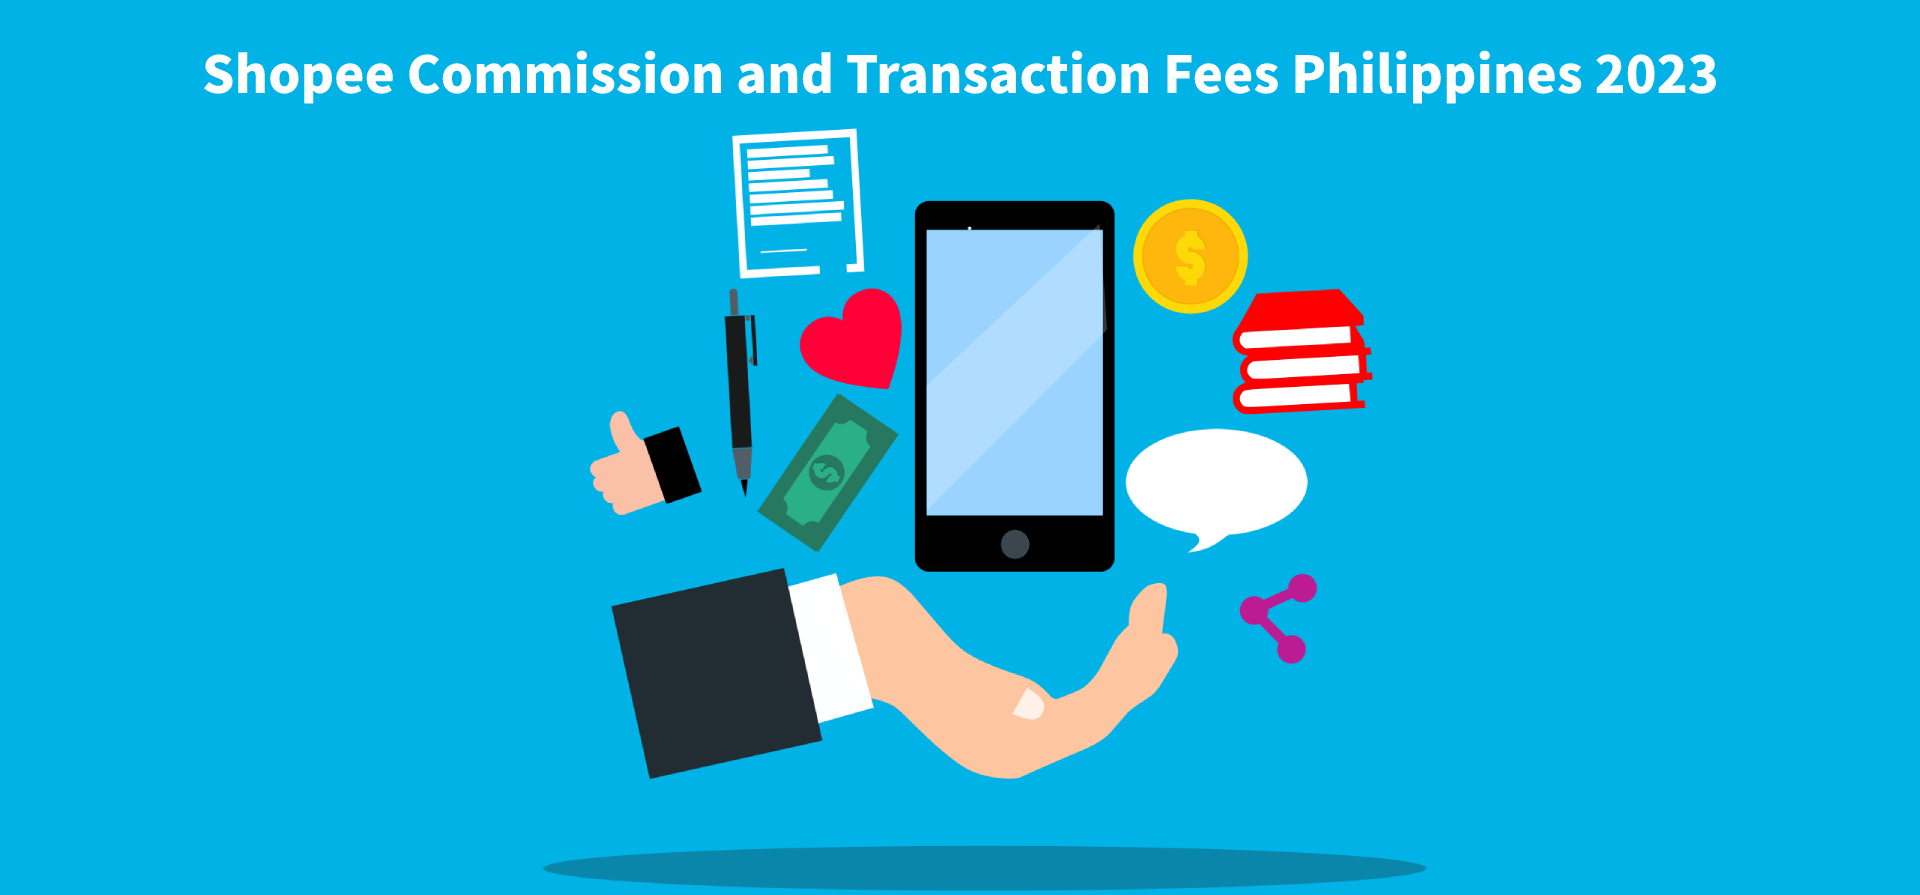 Shopee Commission and Transaction Fees Philippines 2023